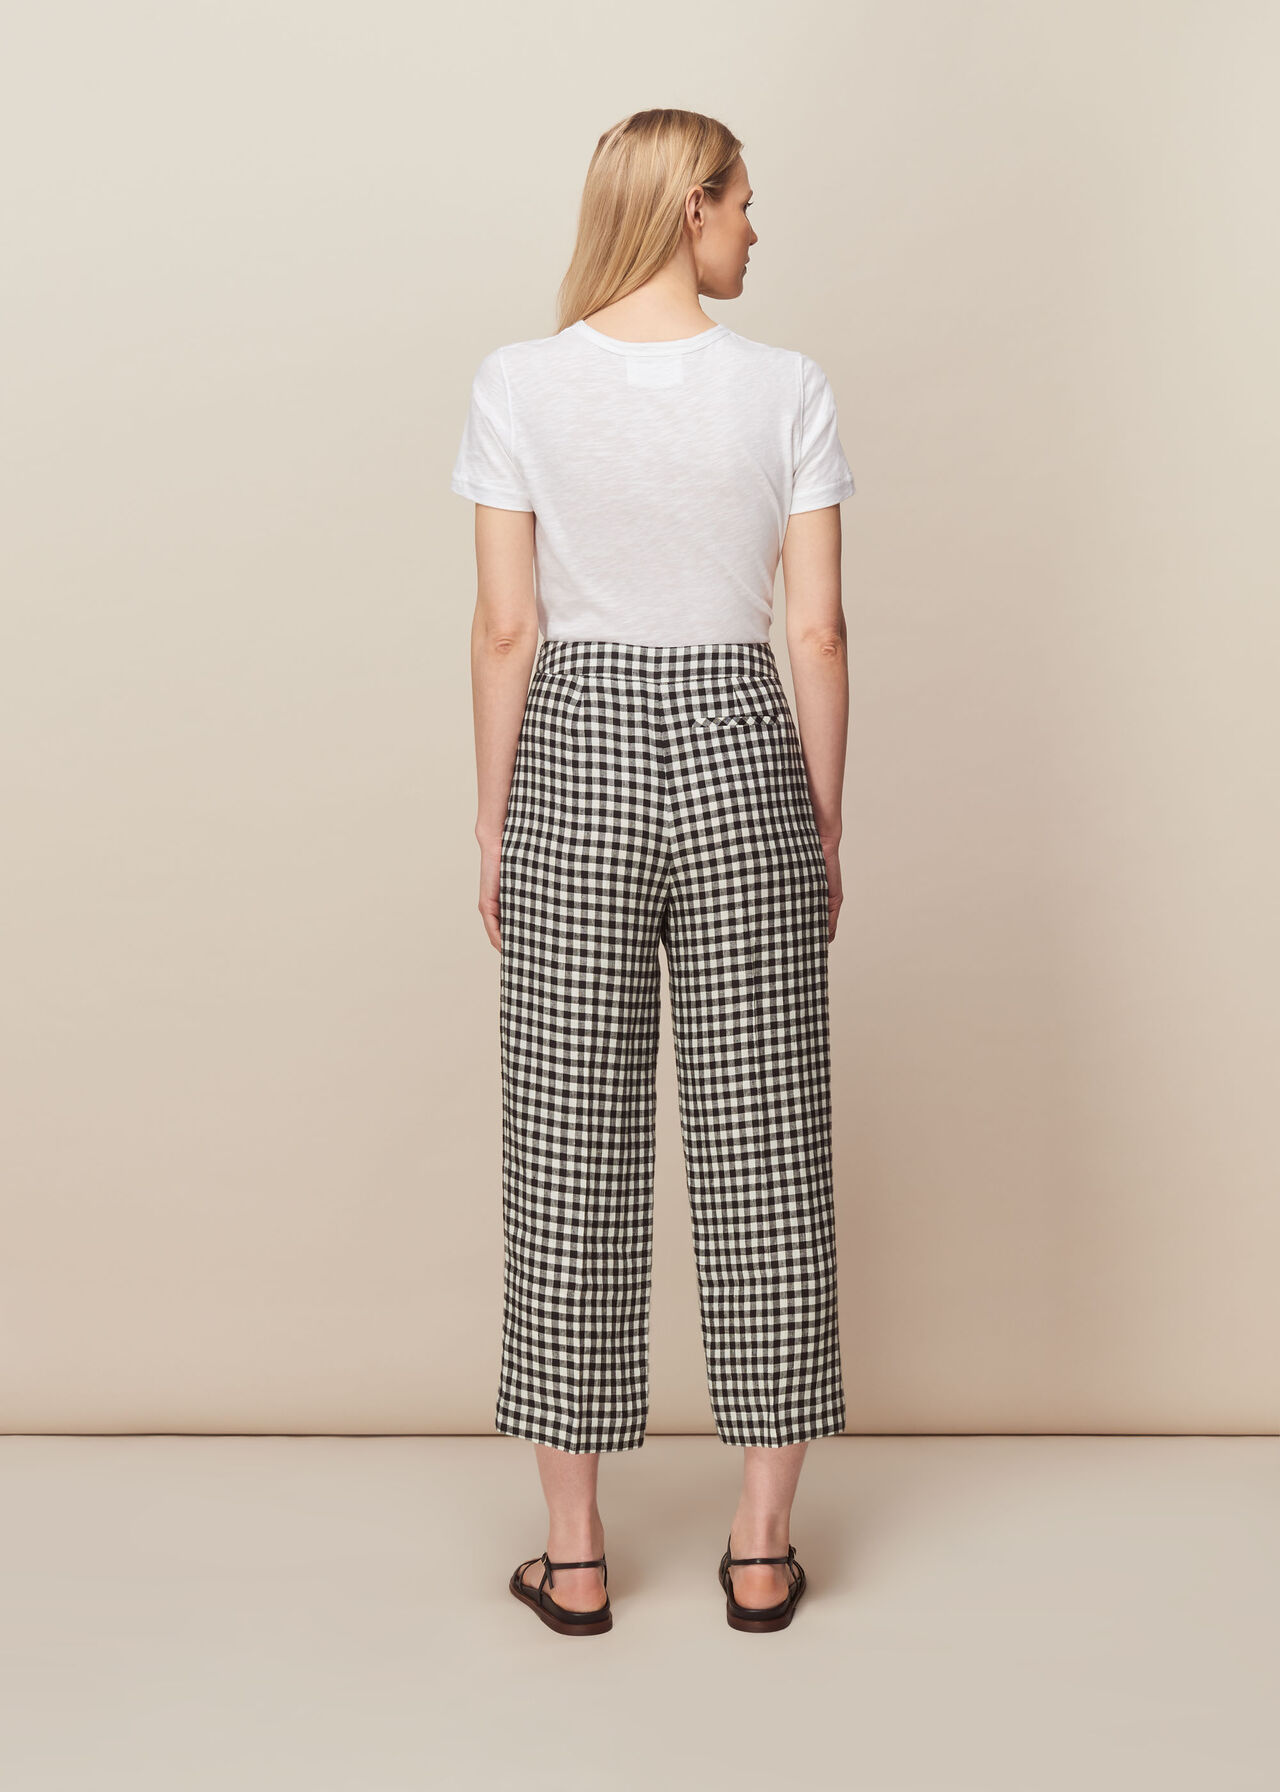 Gingham Linen Cropped Trouser Black and White